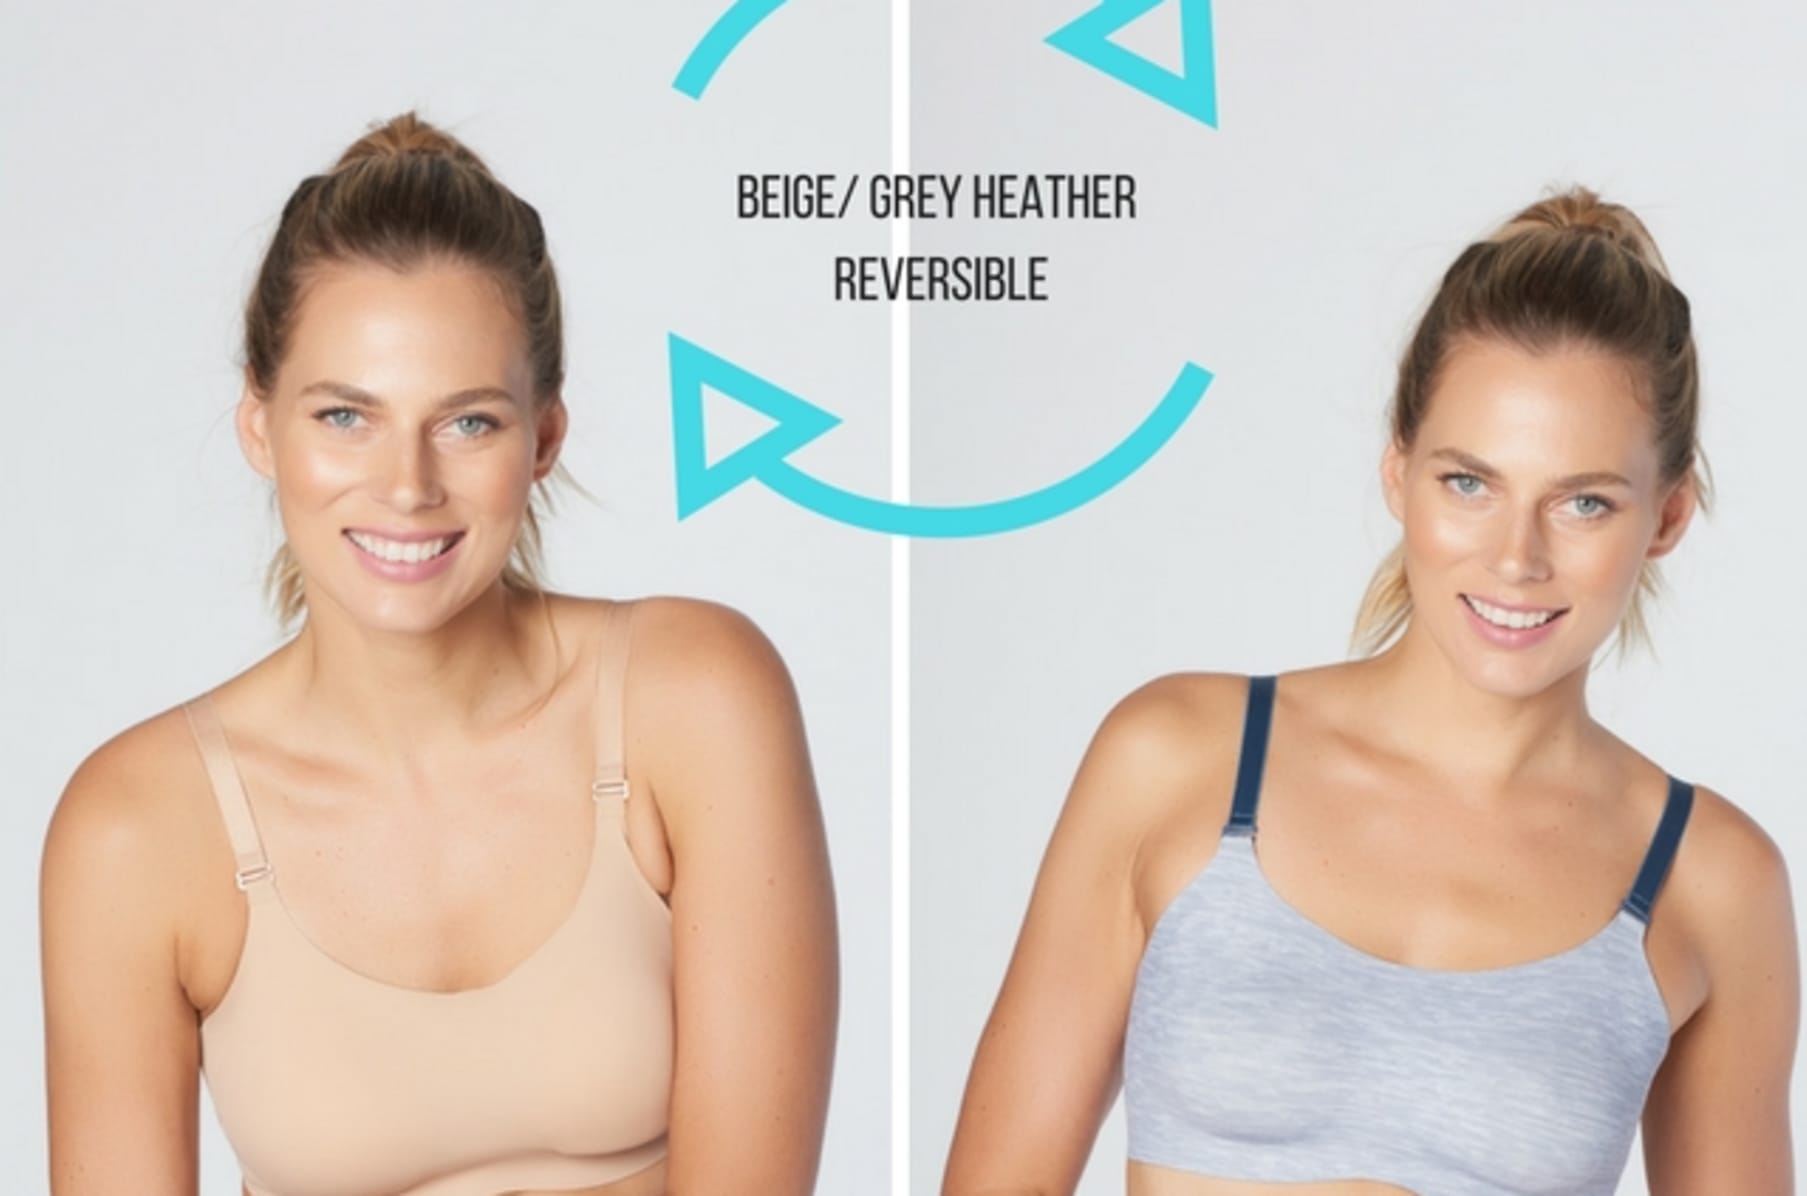 Endeer Launches IndieGoGo Campaign for 3D Printed Bra with Perfect Fit